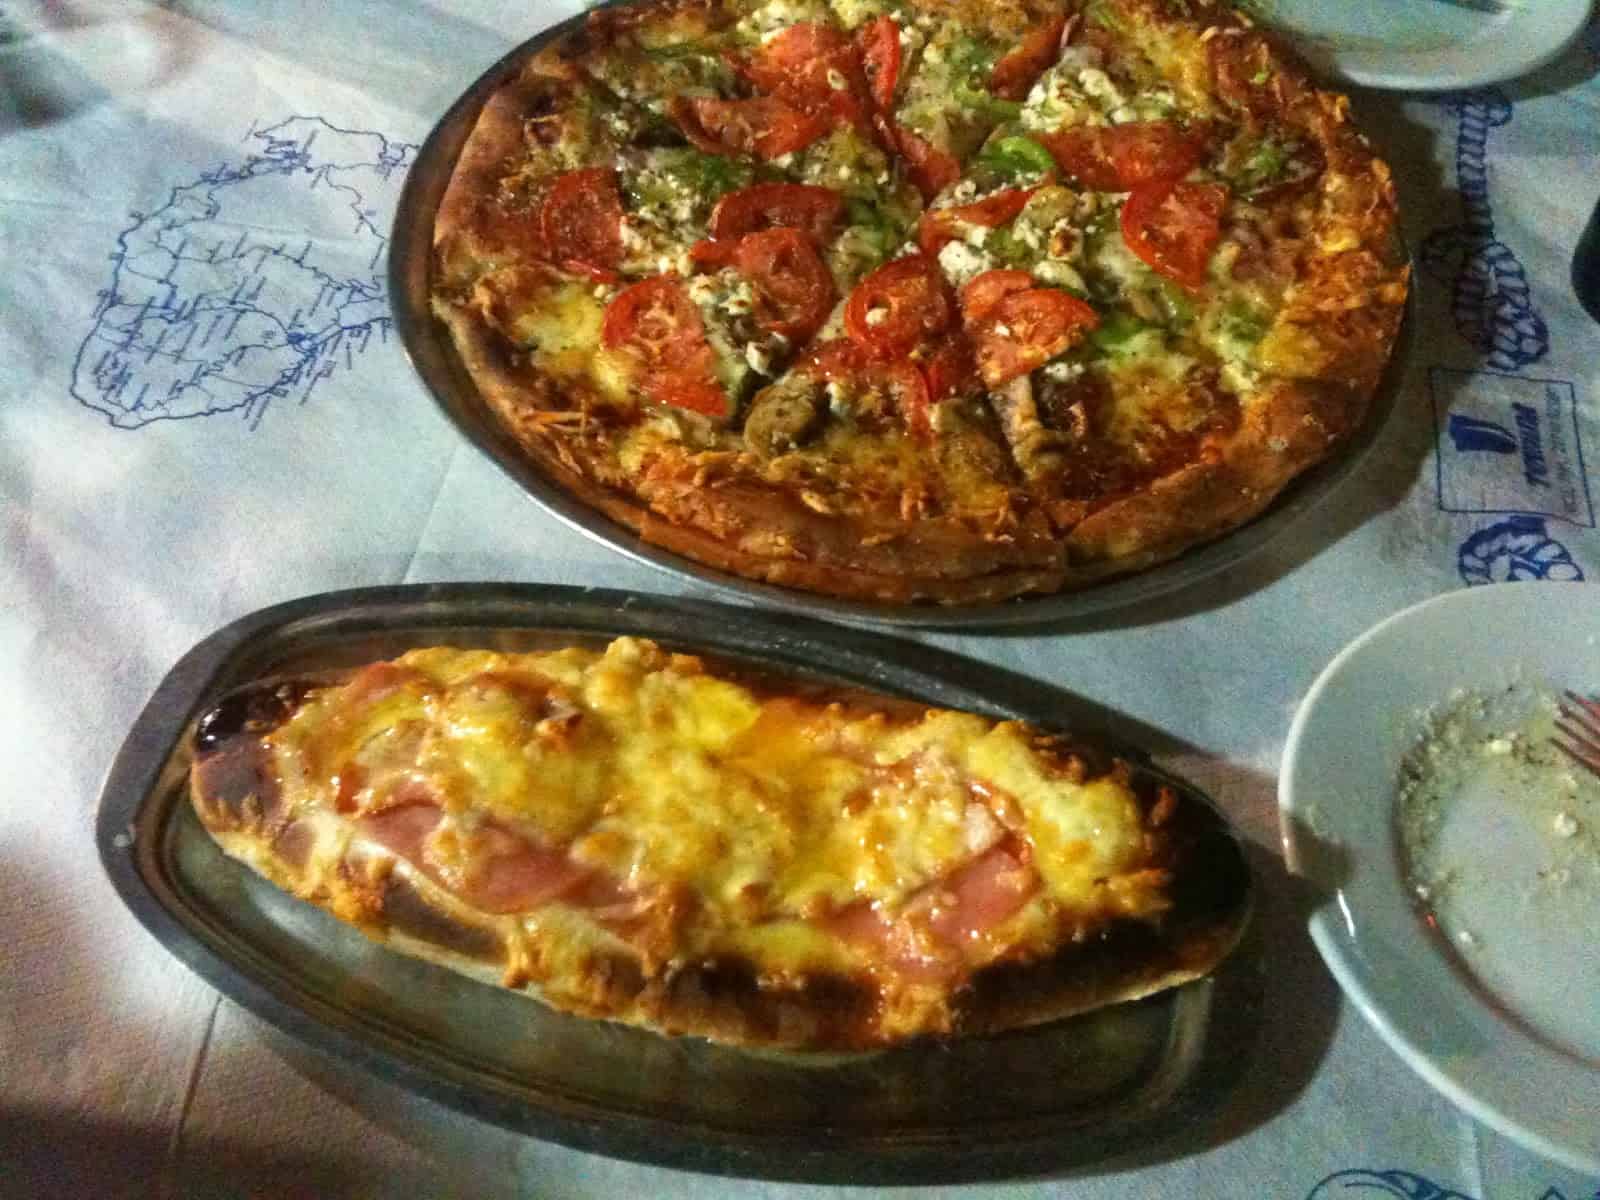 Pizza (top) and peynirli (bottom) at Likos in Komi, Chios, Greece